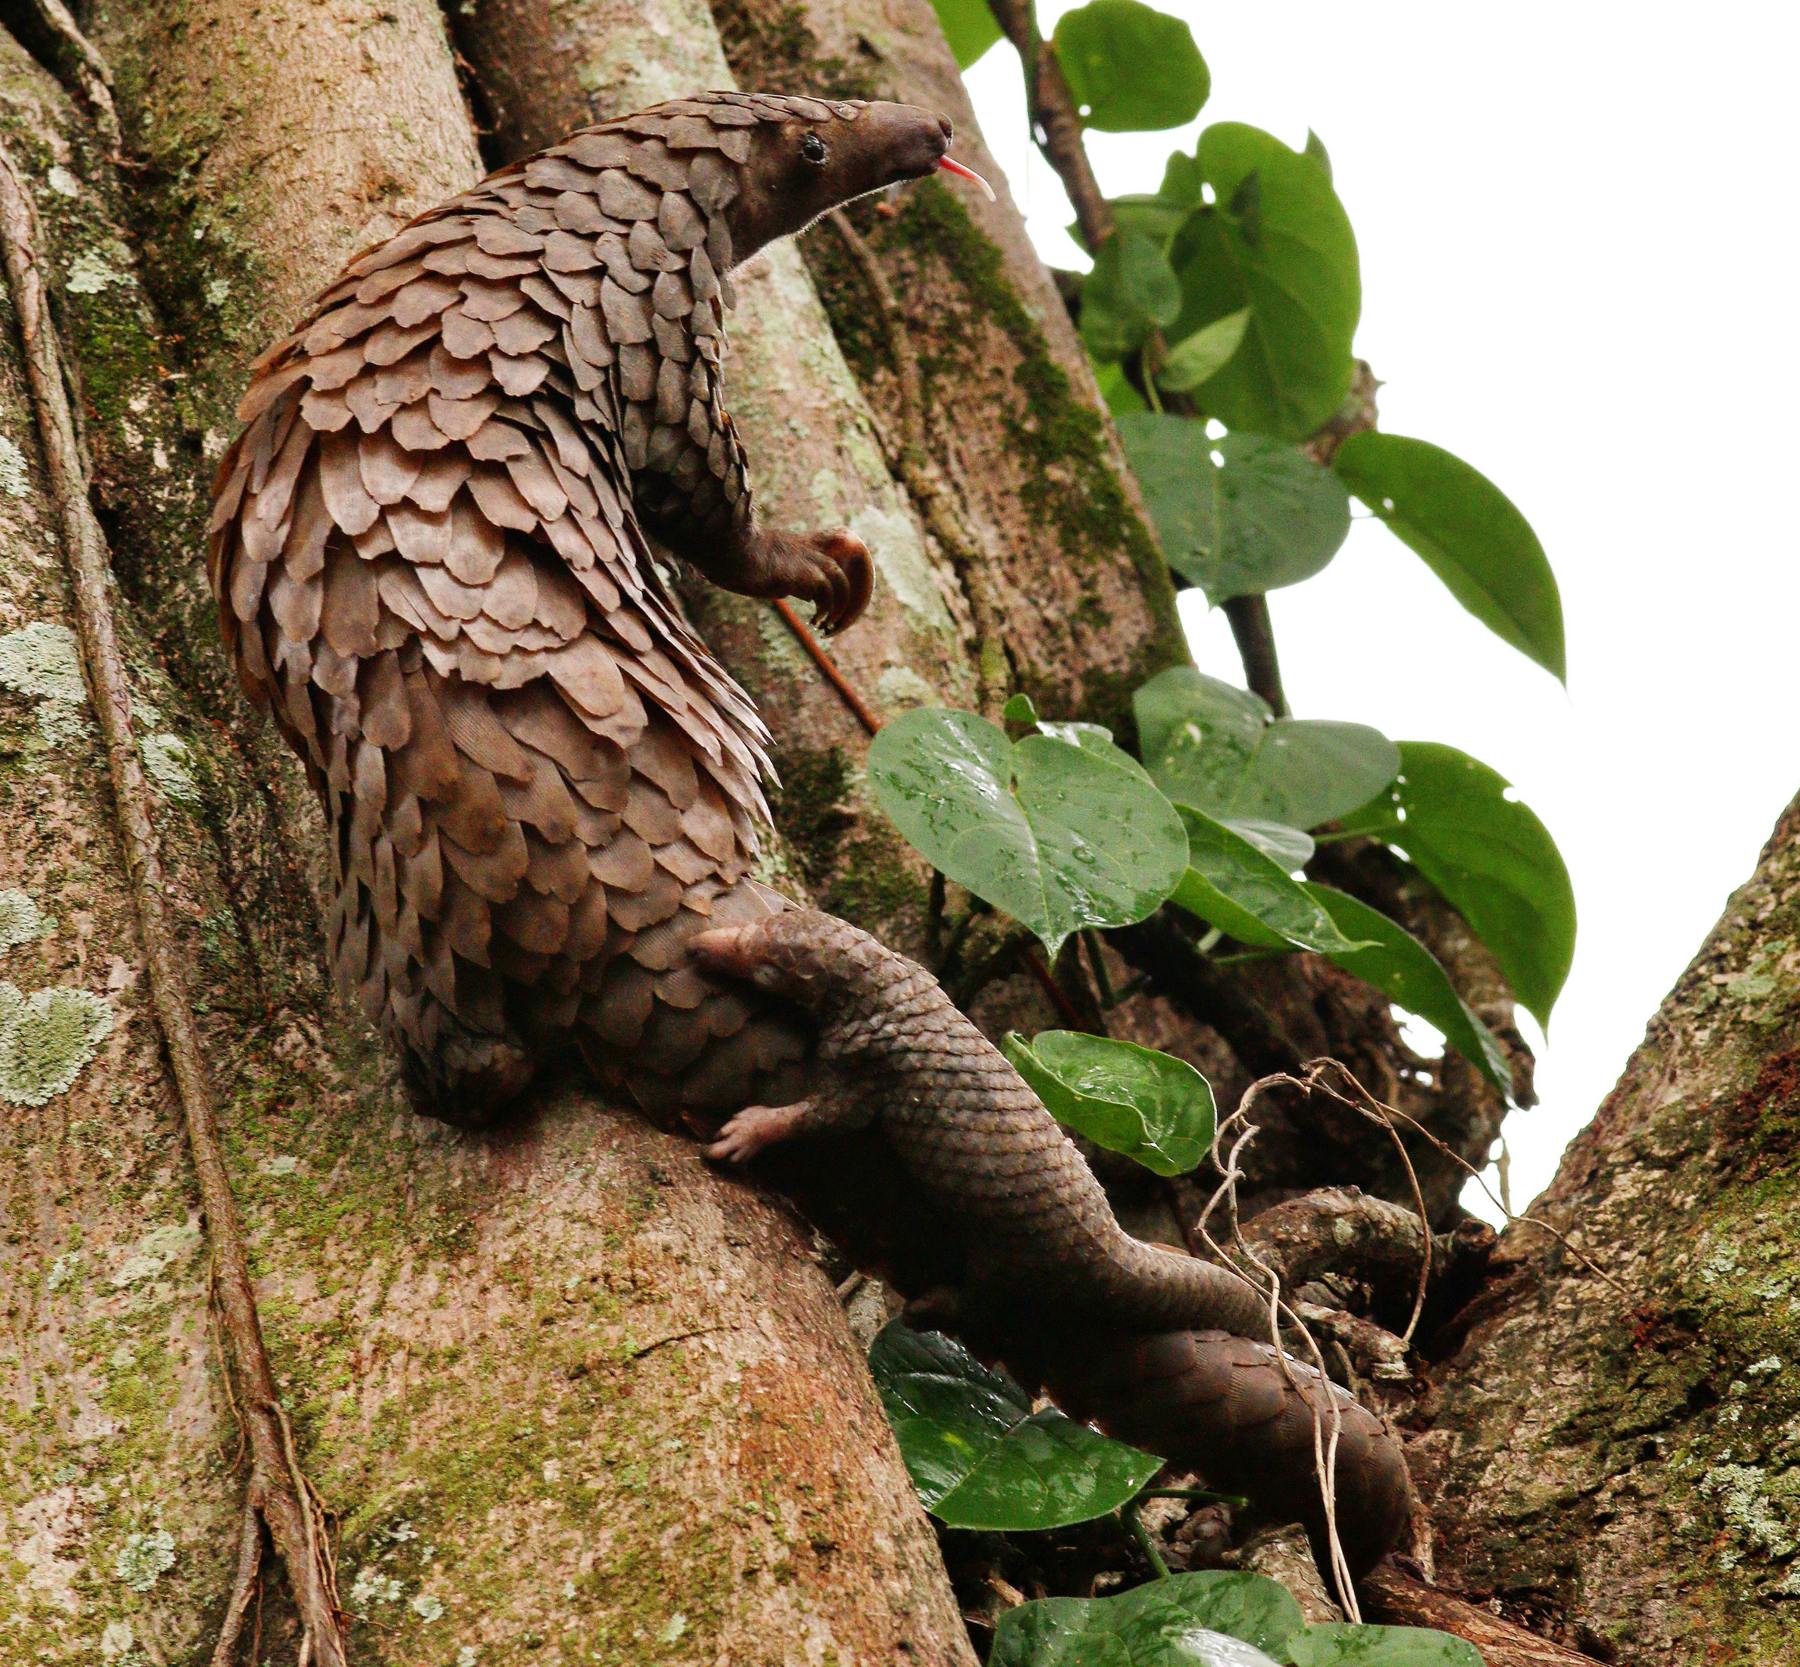 tree pangolin adult climbs up a tree as a baby pangolin holds onto its tail